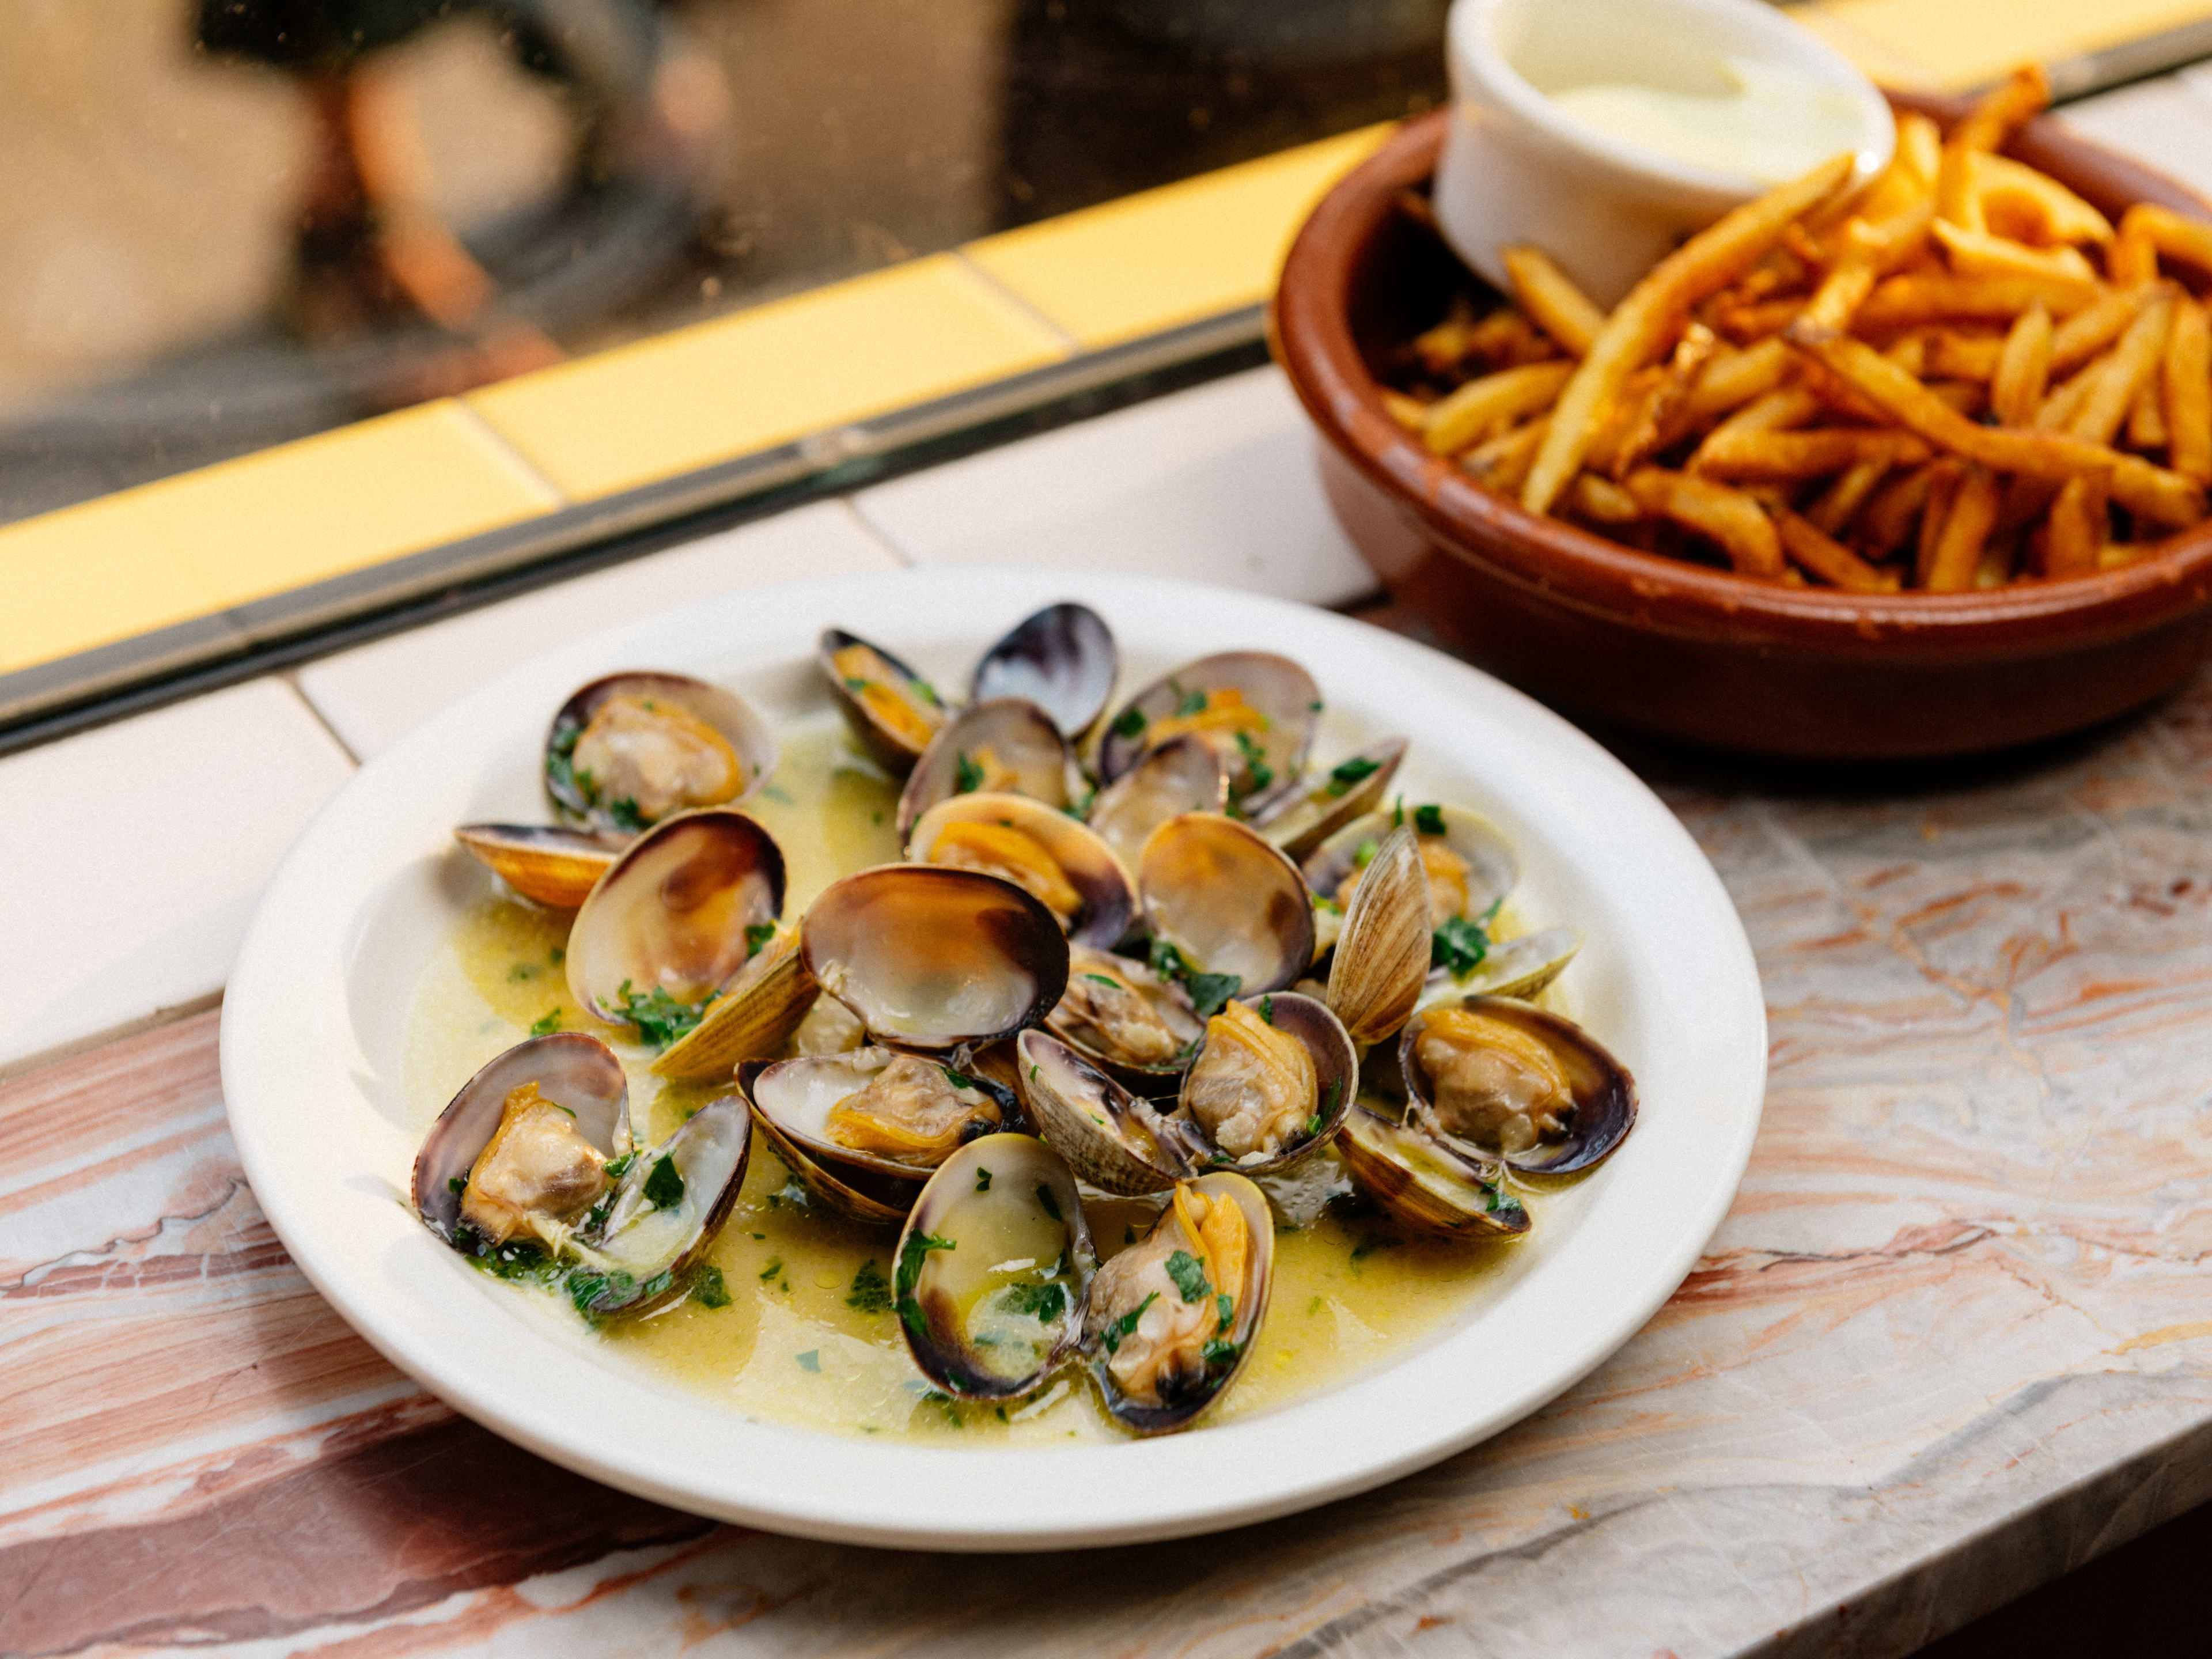 A small plate of manilla clams sitting broth, with a side of fries.